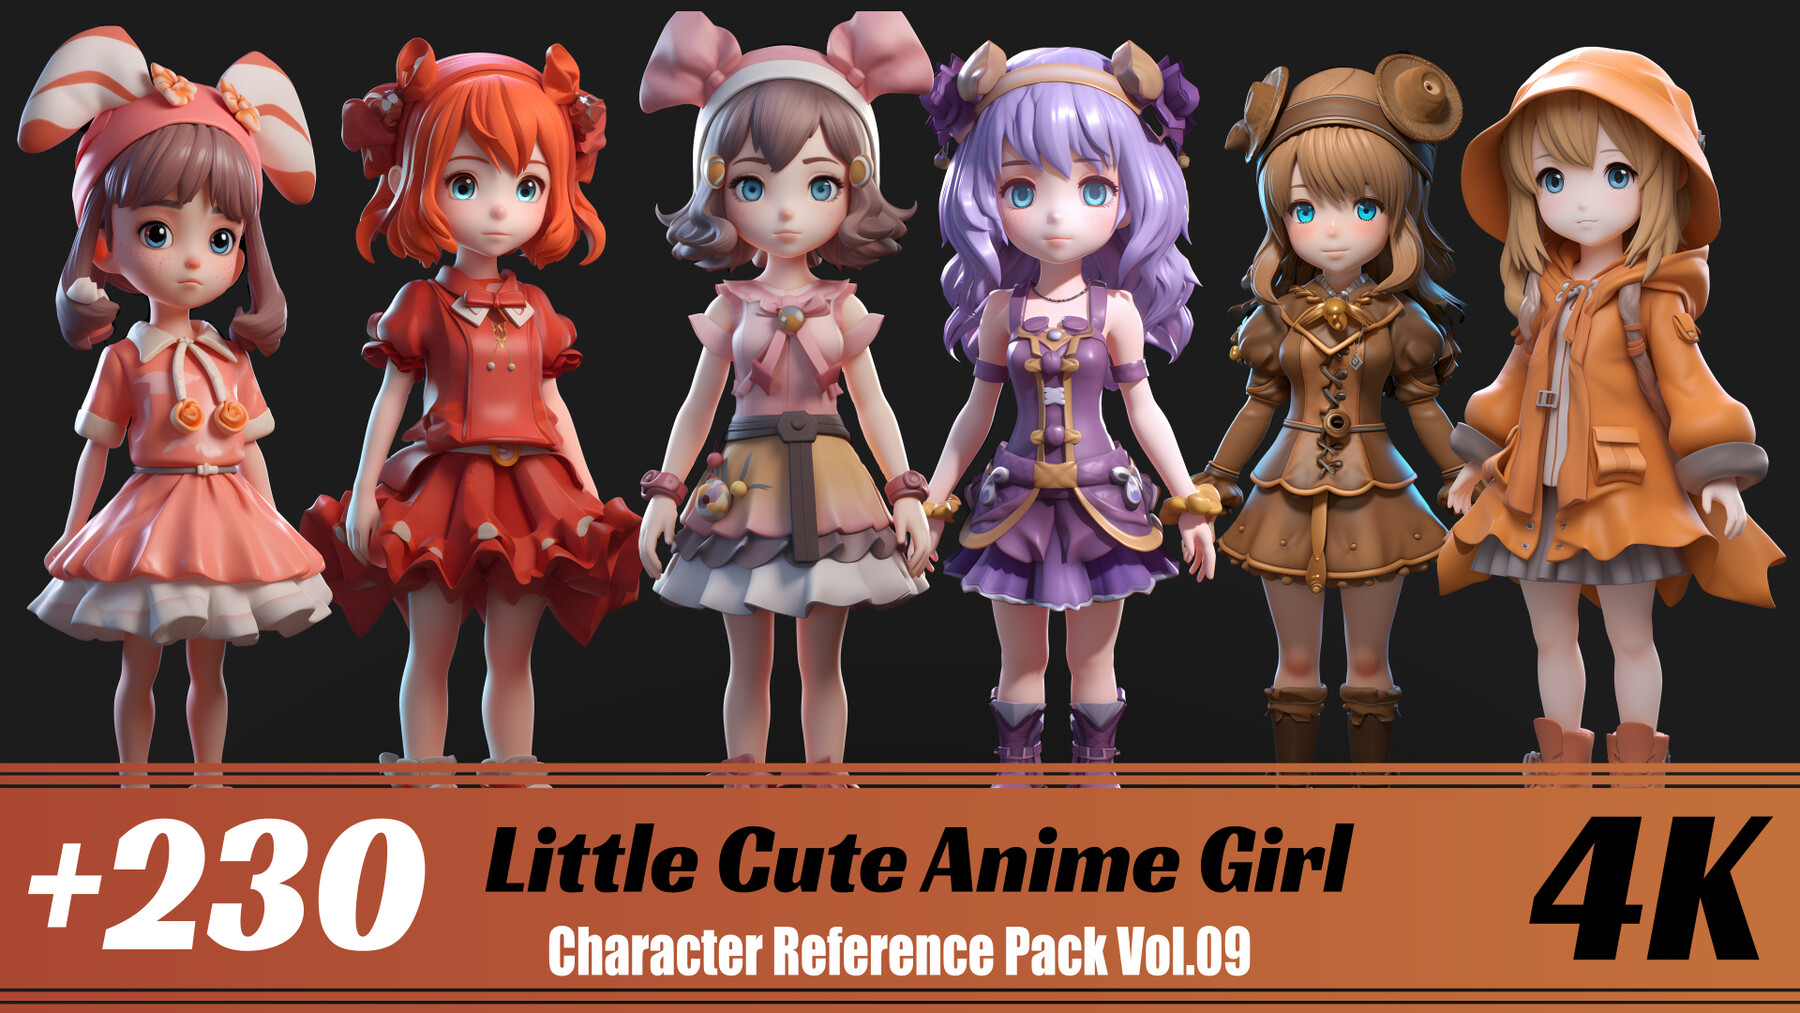 Anime Girls Pack, Characters